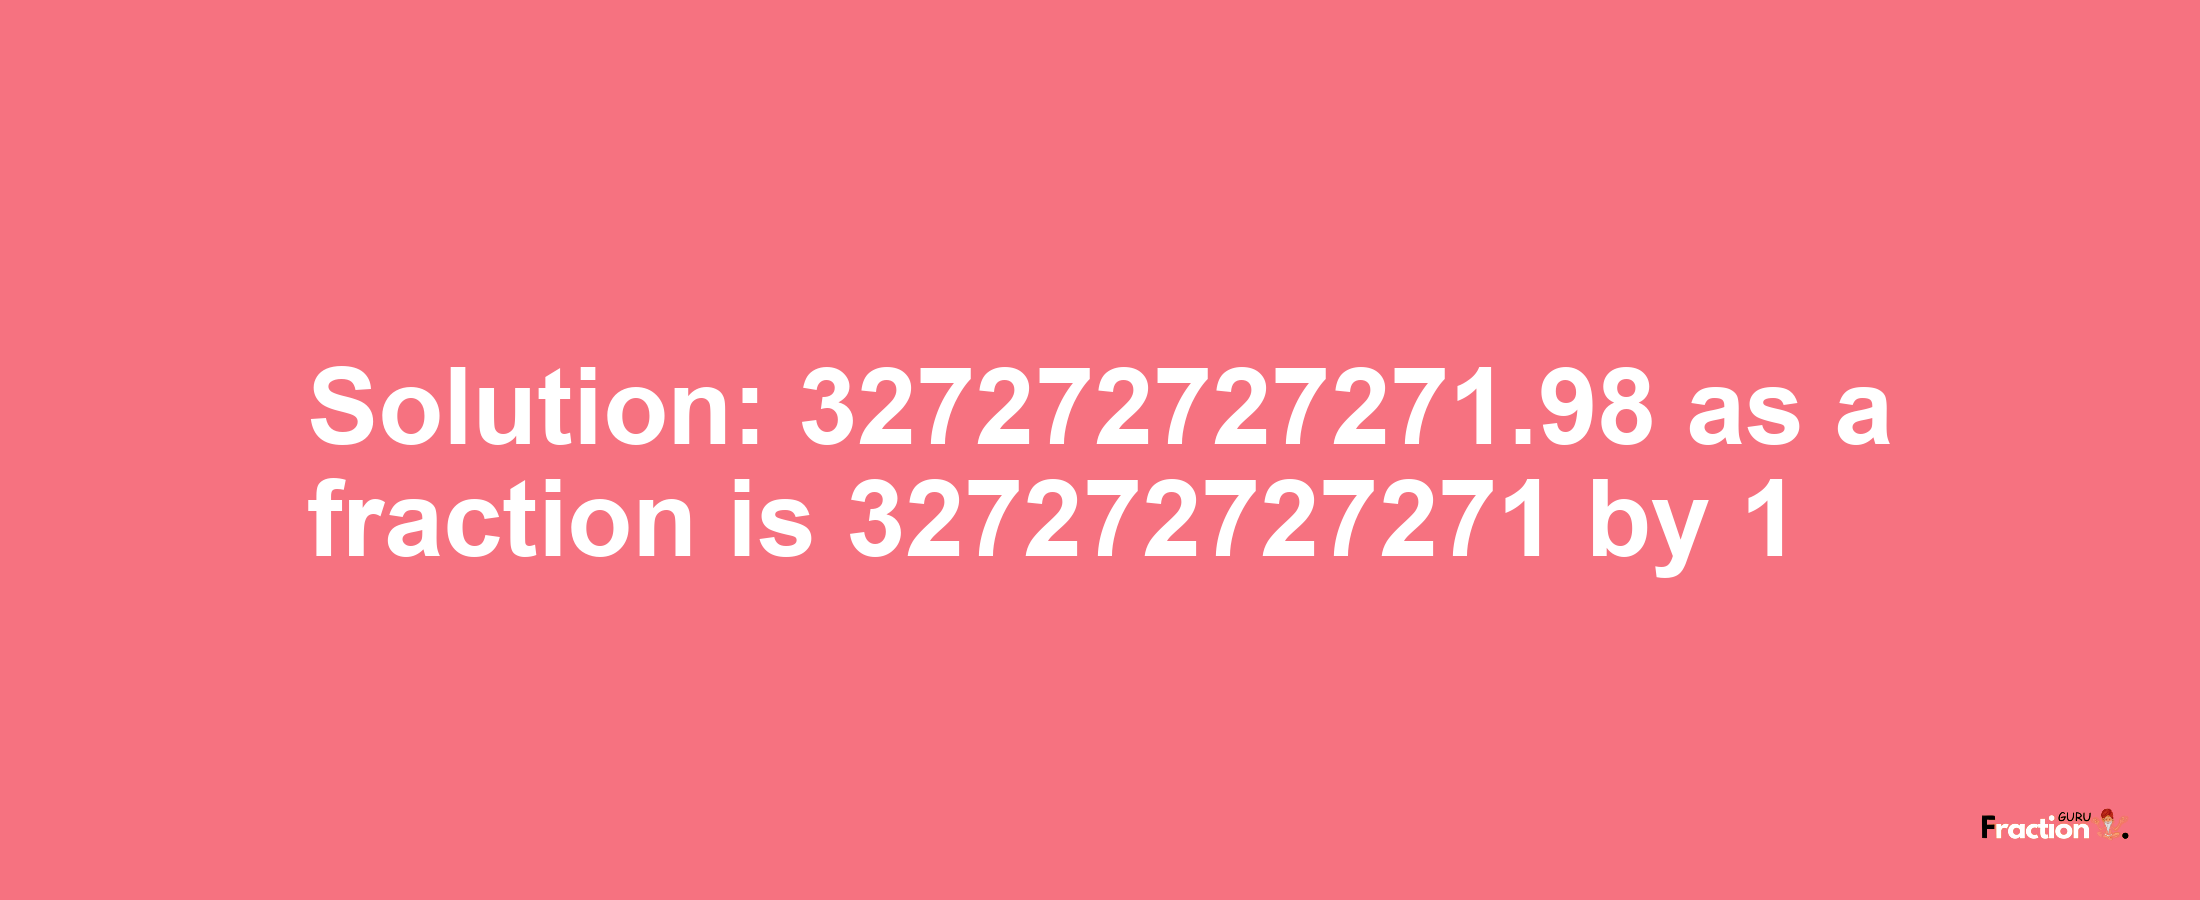 Solution:327272727271.98 as a fraction is 327272727271/1